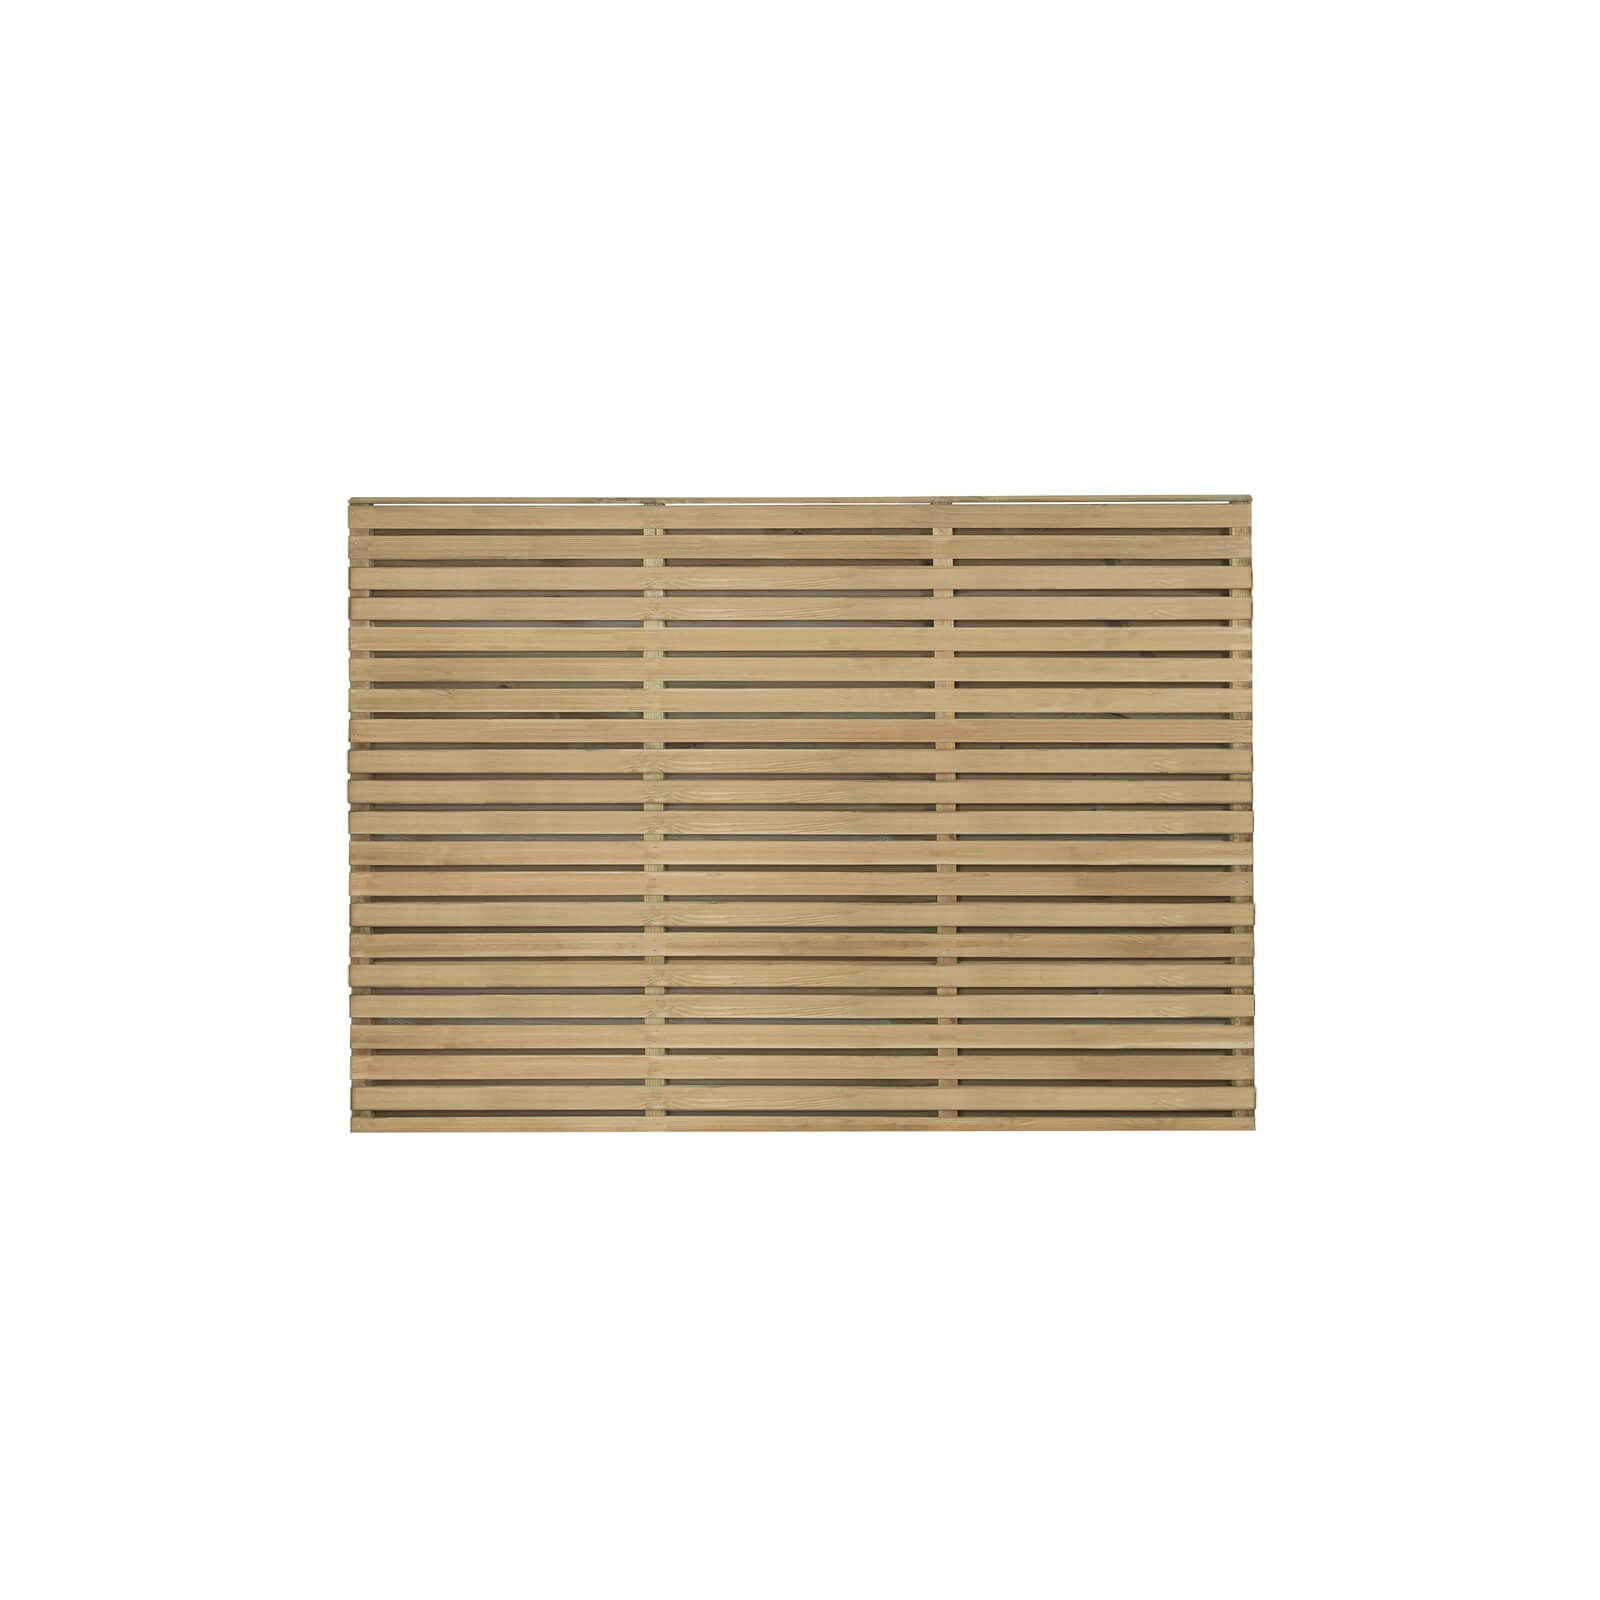 6ft x 4ft (1.8m x 1.2m) Pressure Treated Contemporary Double Slatted Fence Panel - Pack of 4